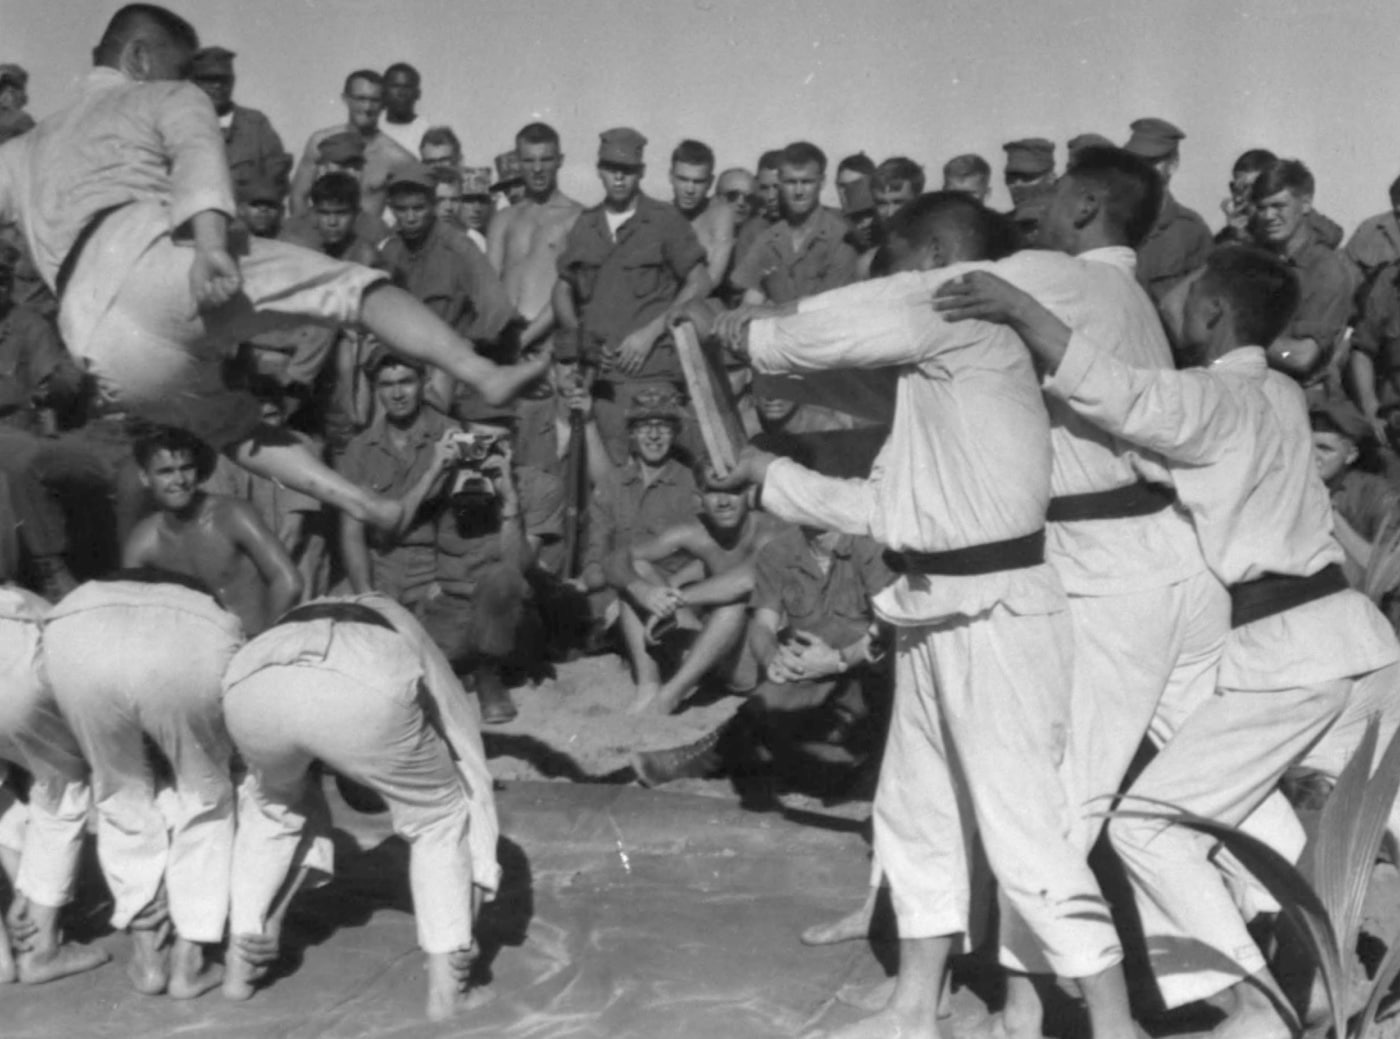 In this image, South Korean Marines demonstrate martial arts during the Vietnam War. Korea is often associated with Taekwondo. However, there are many practitioners of karate, judo, kung fu, Chinese martial arts, kick boxing, Japanese martial arts, mixed martial arts and more. Several of the men in this jpeg are black belts.